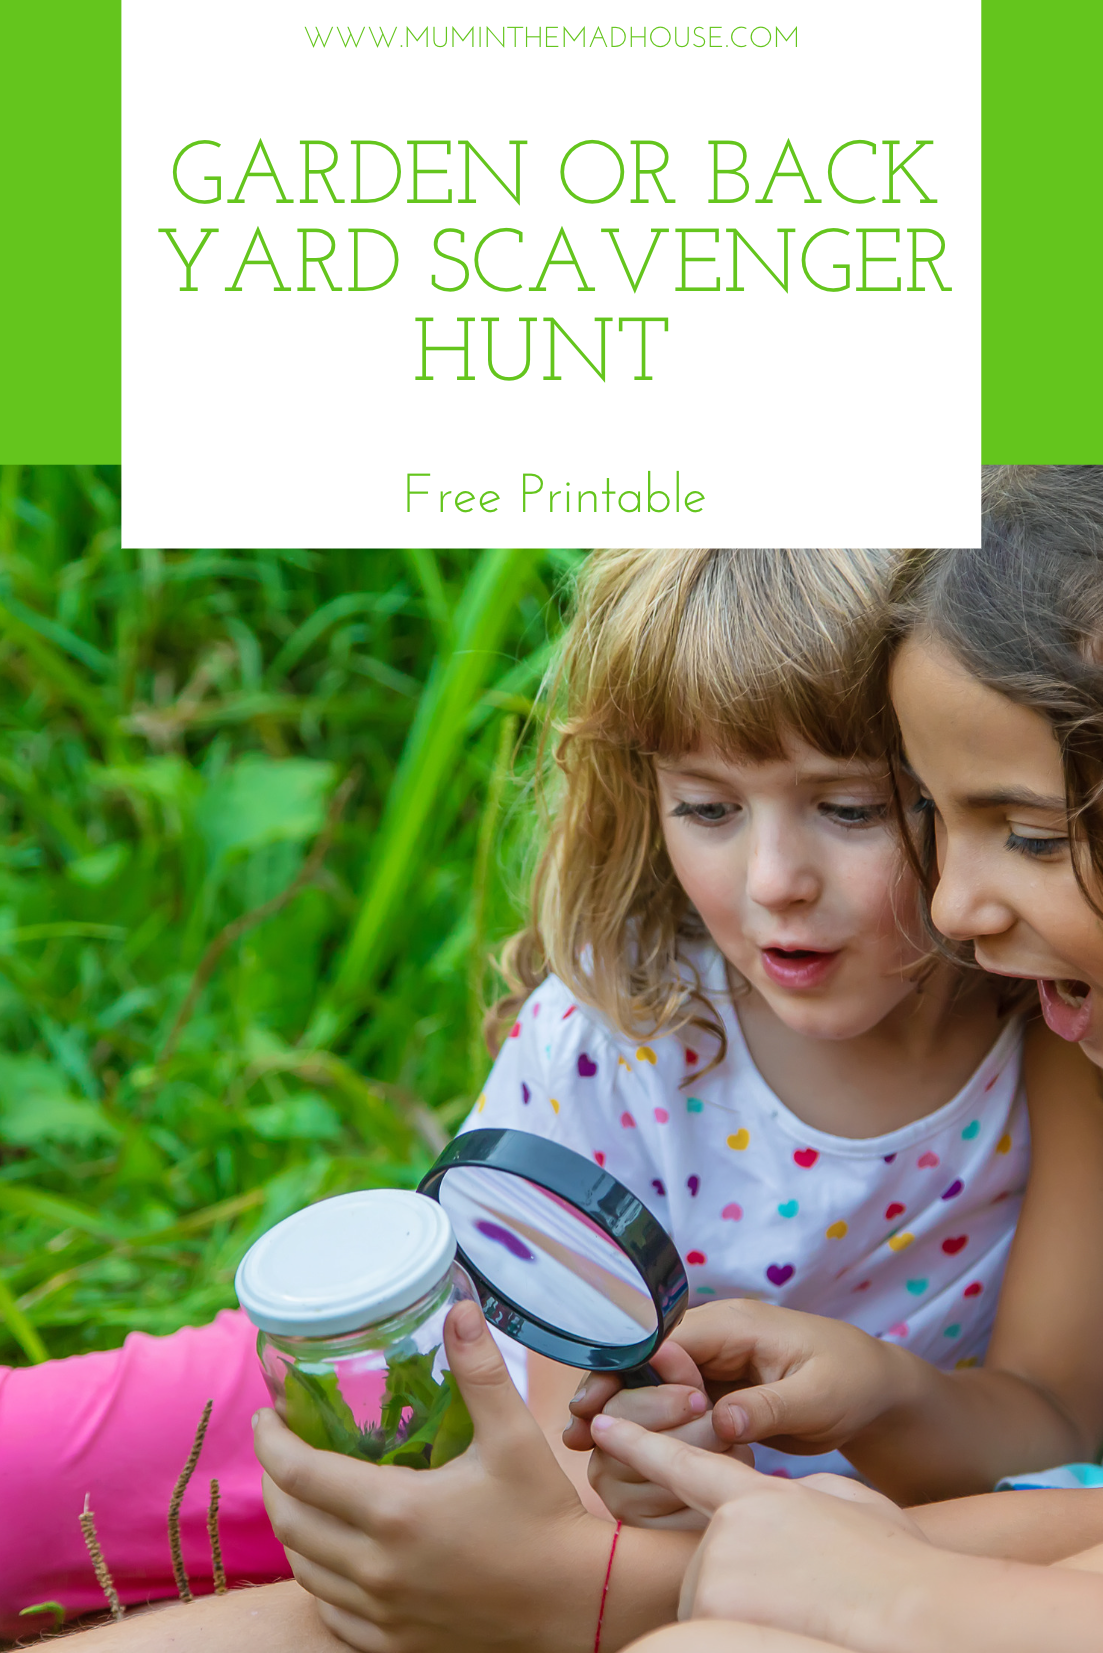 Encourage the kids to head outdoors with this free printable garden scavenger hunt for a hands-on nature activity. 